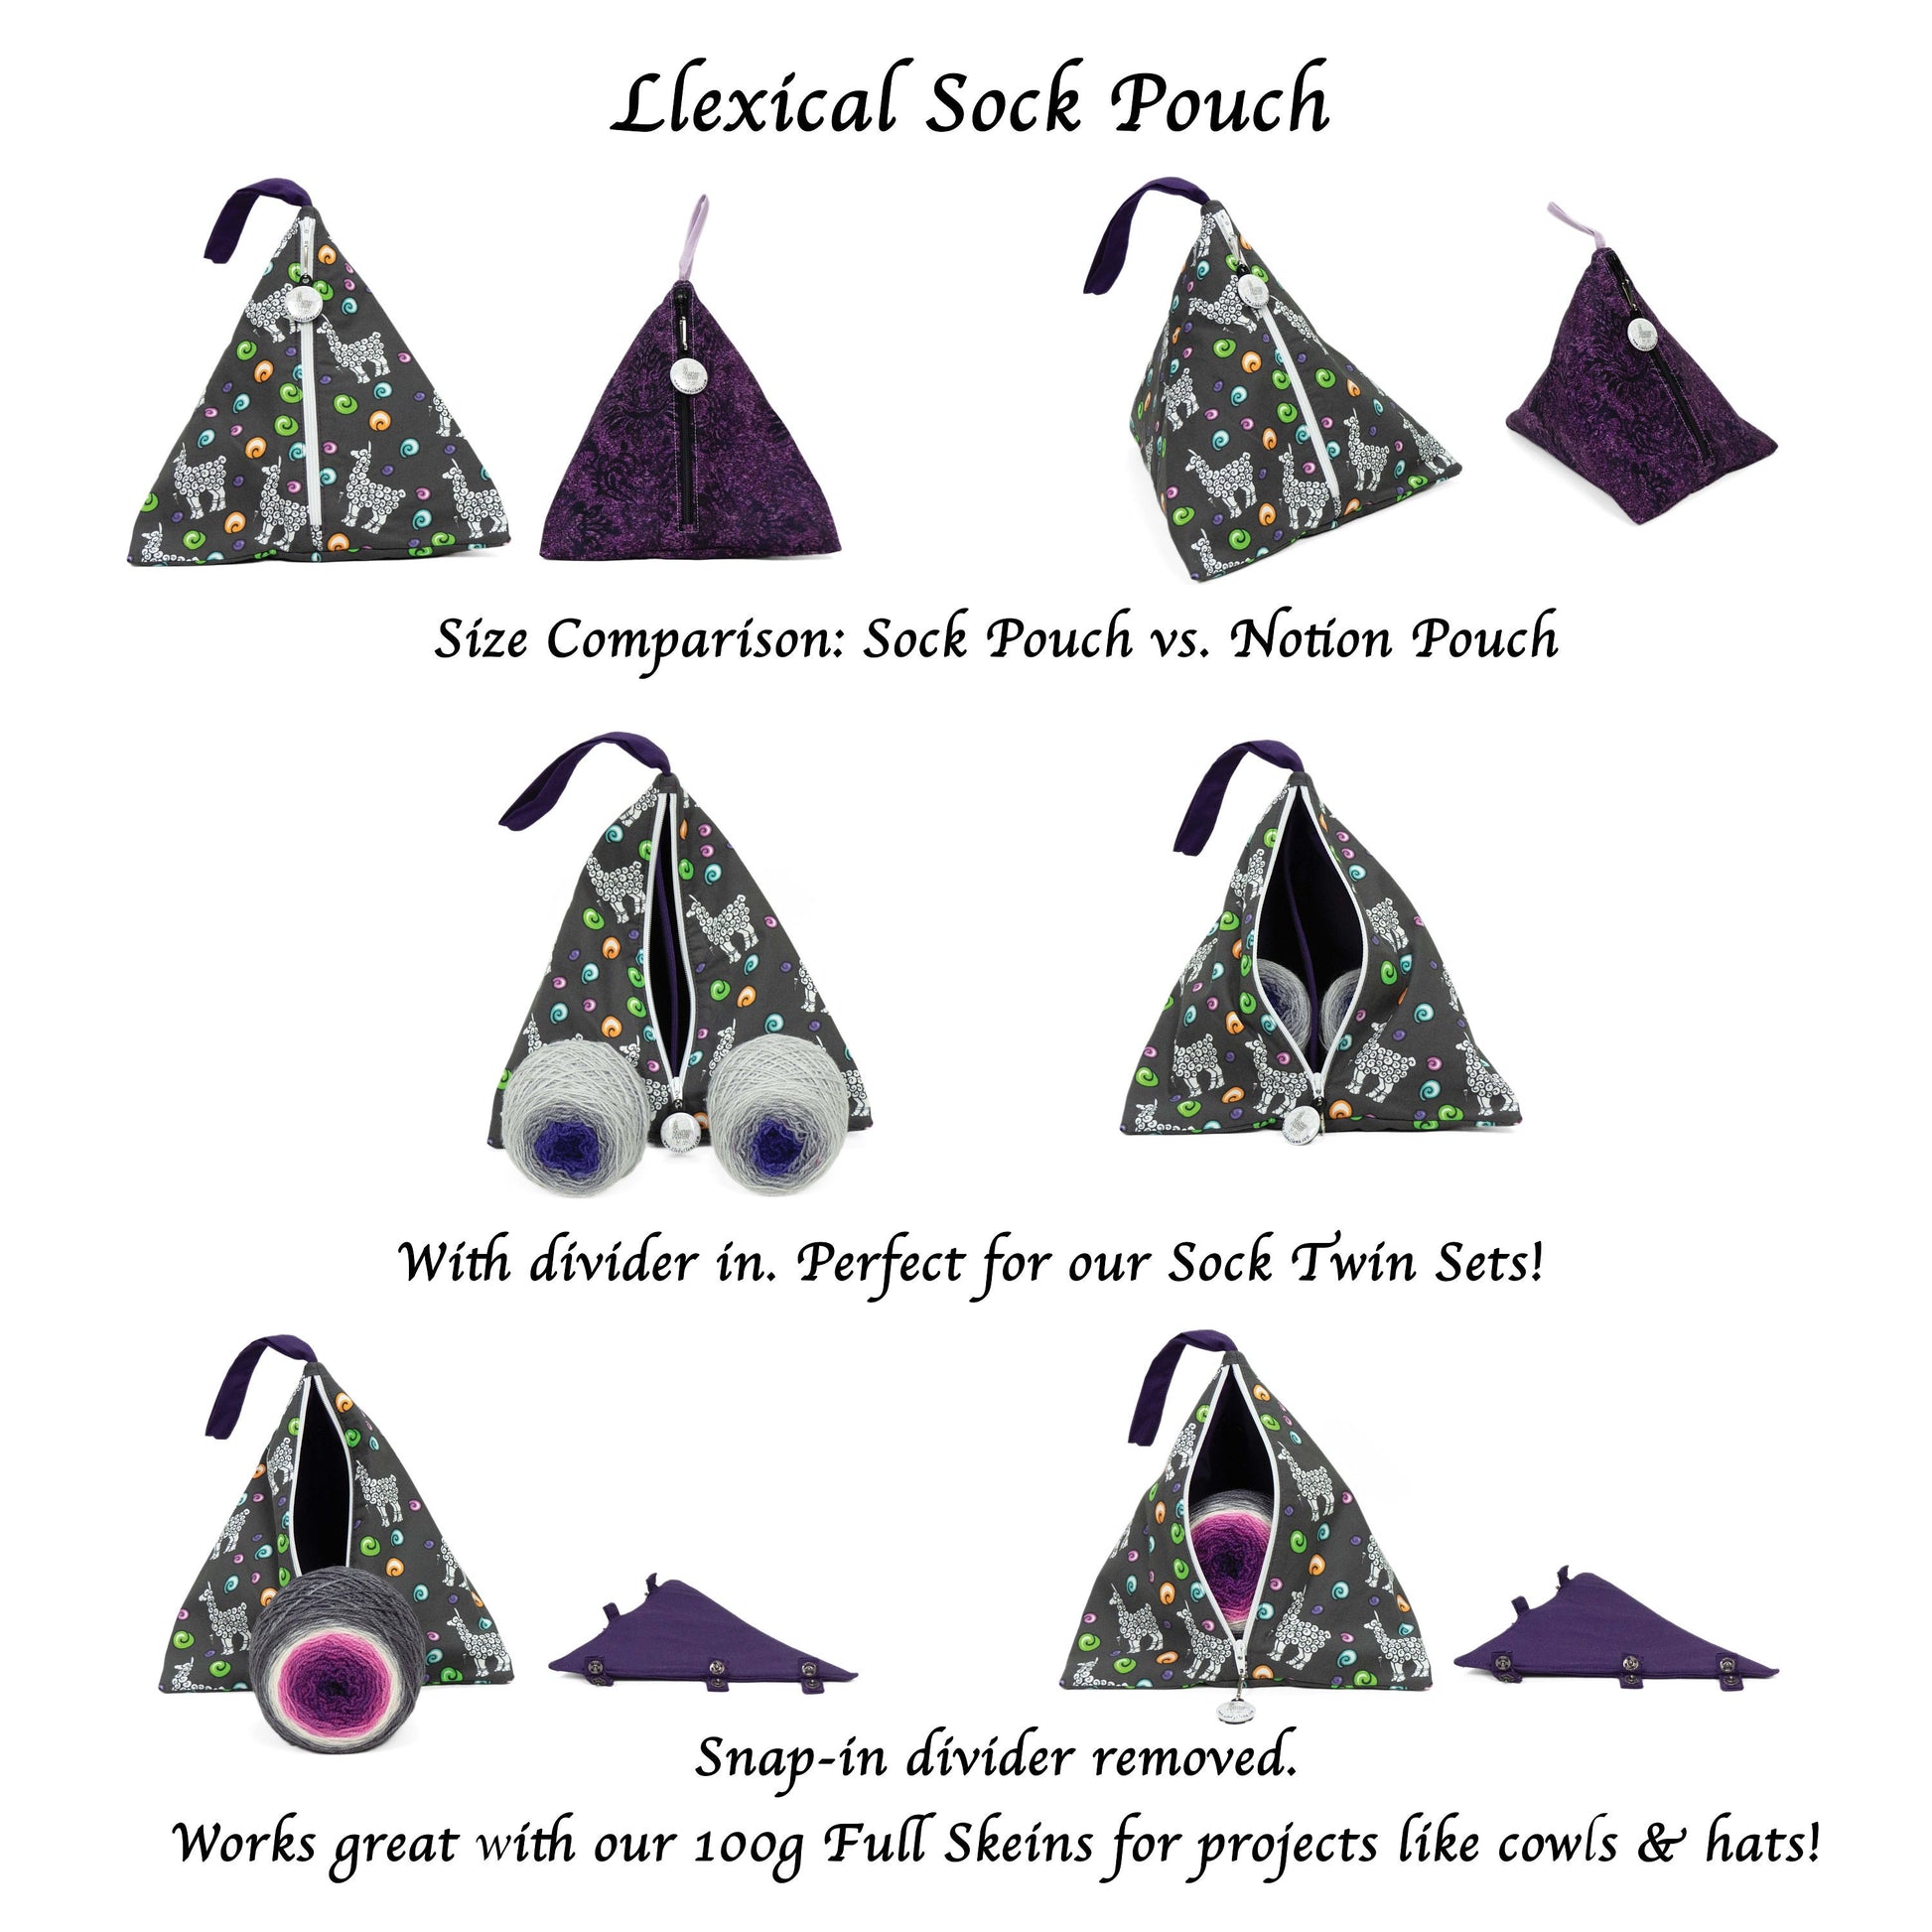 Gnome Laundry - Llexical Divided Sock Pouch - Knitting, Crochet, Spinning Project Bag